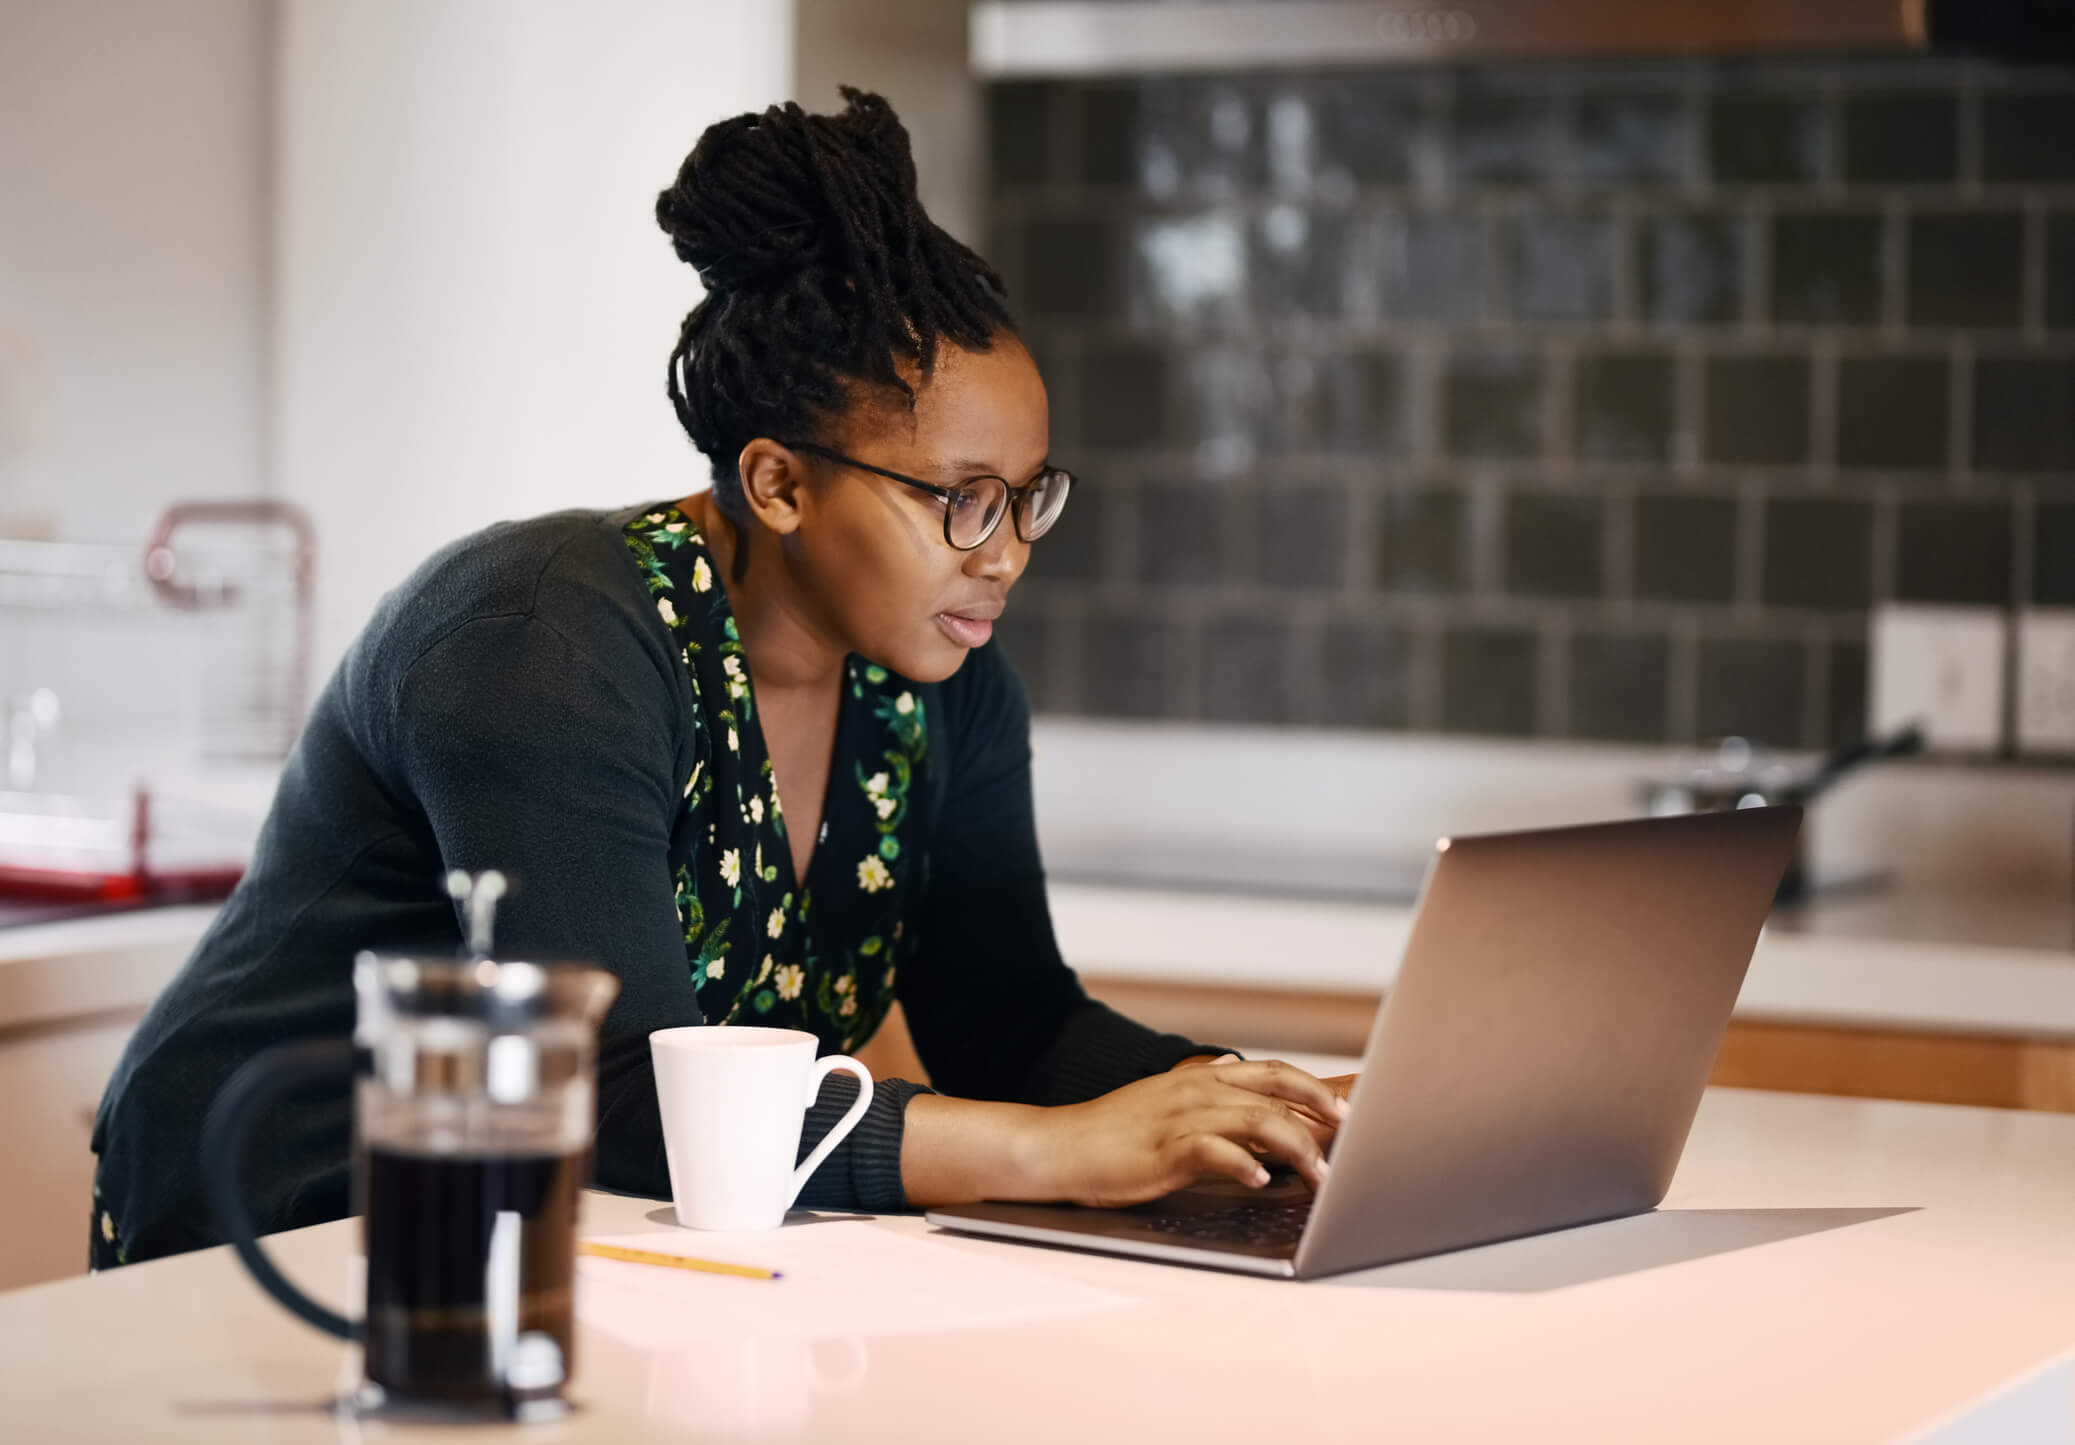 Mid-adult Black woman searching for information on her laptop. She is sitting at the kitchen island inside her home while drinking a cup of coffee.